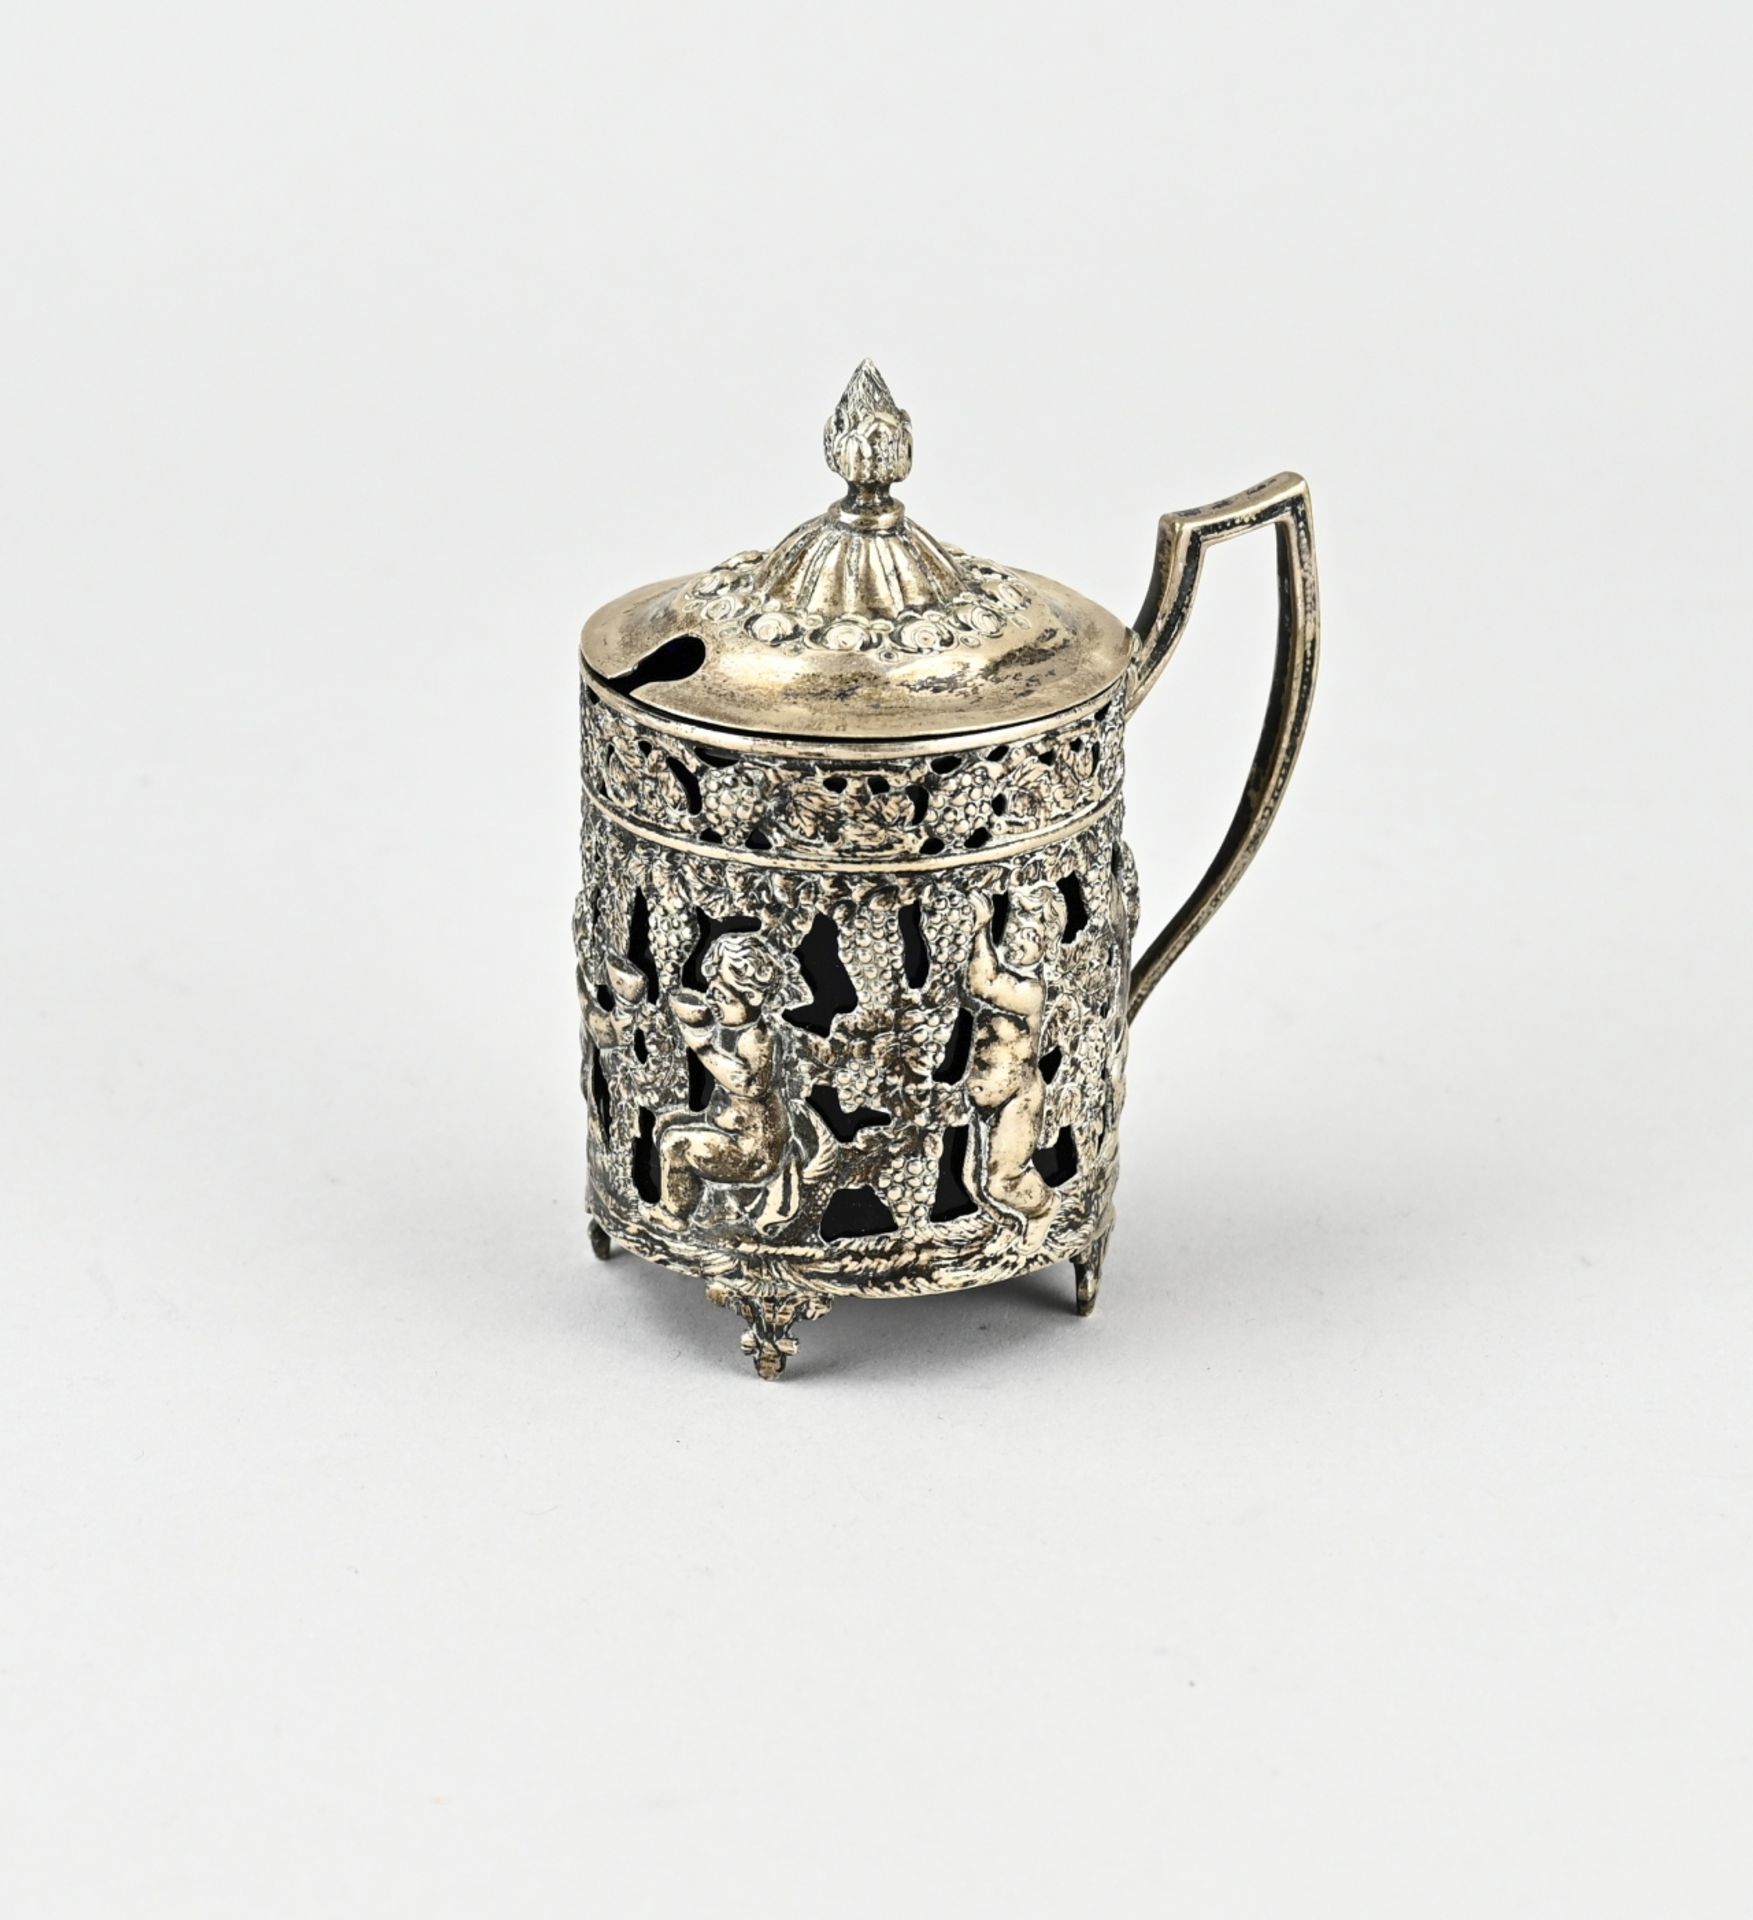 Silver mustard pot with blue glass